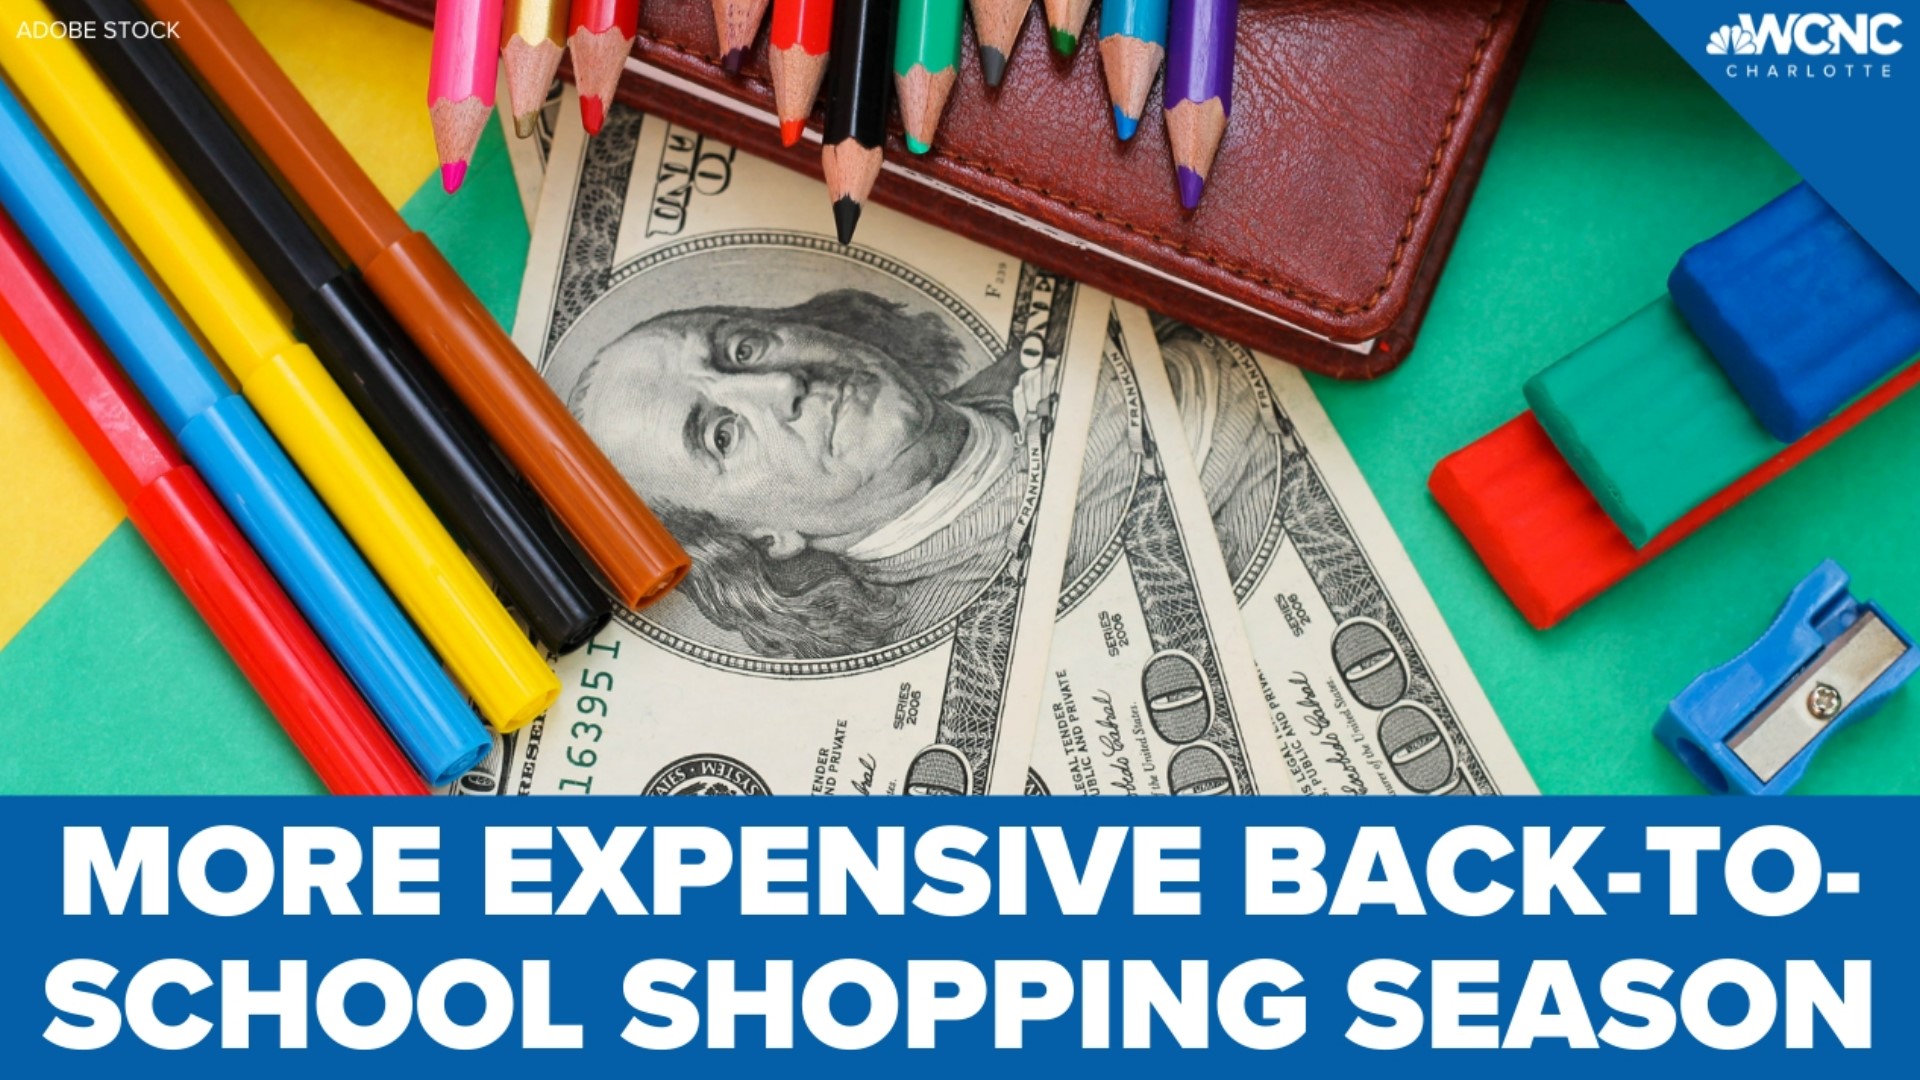 According to the National Retail Federation, on average families are planning to spend $864 on school necessities.